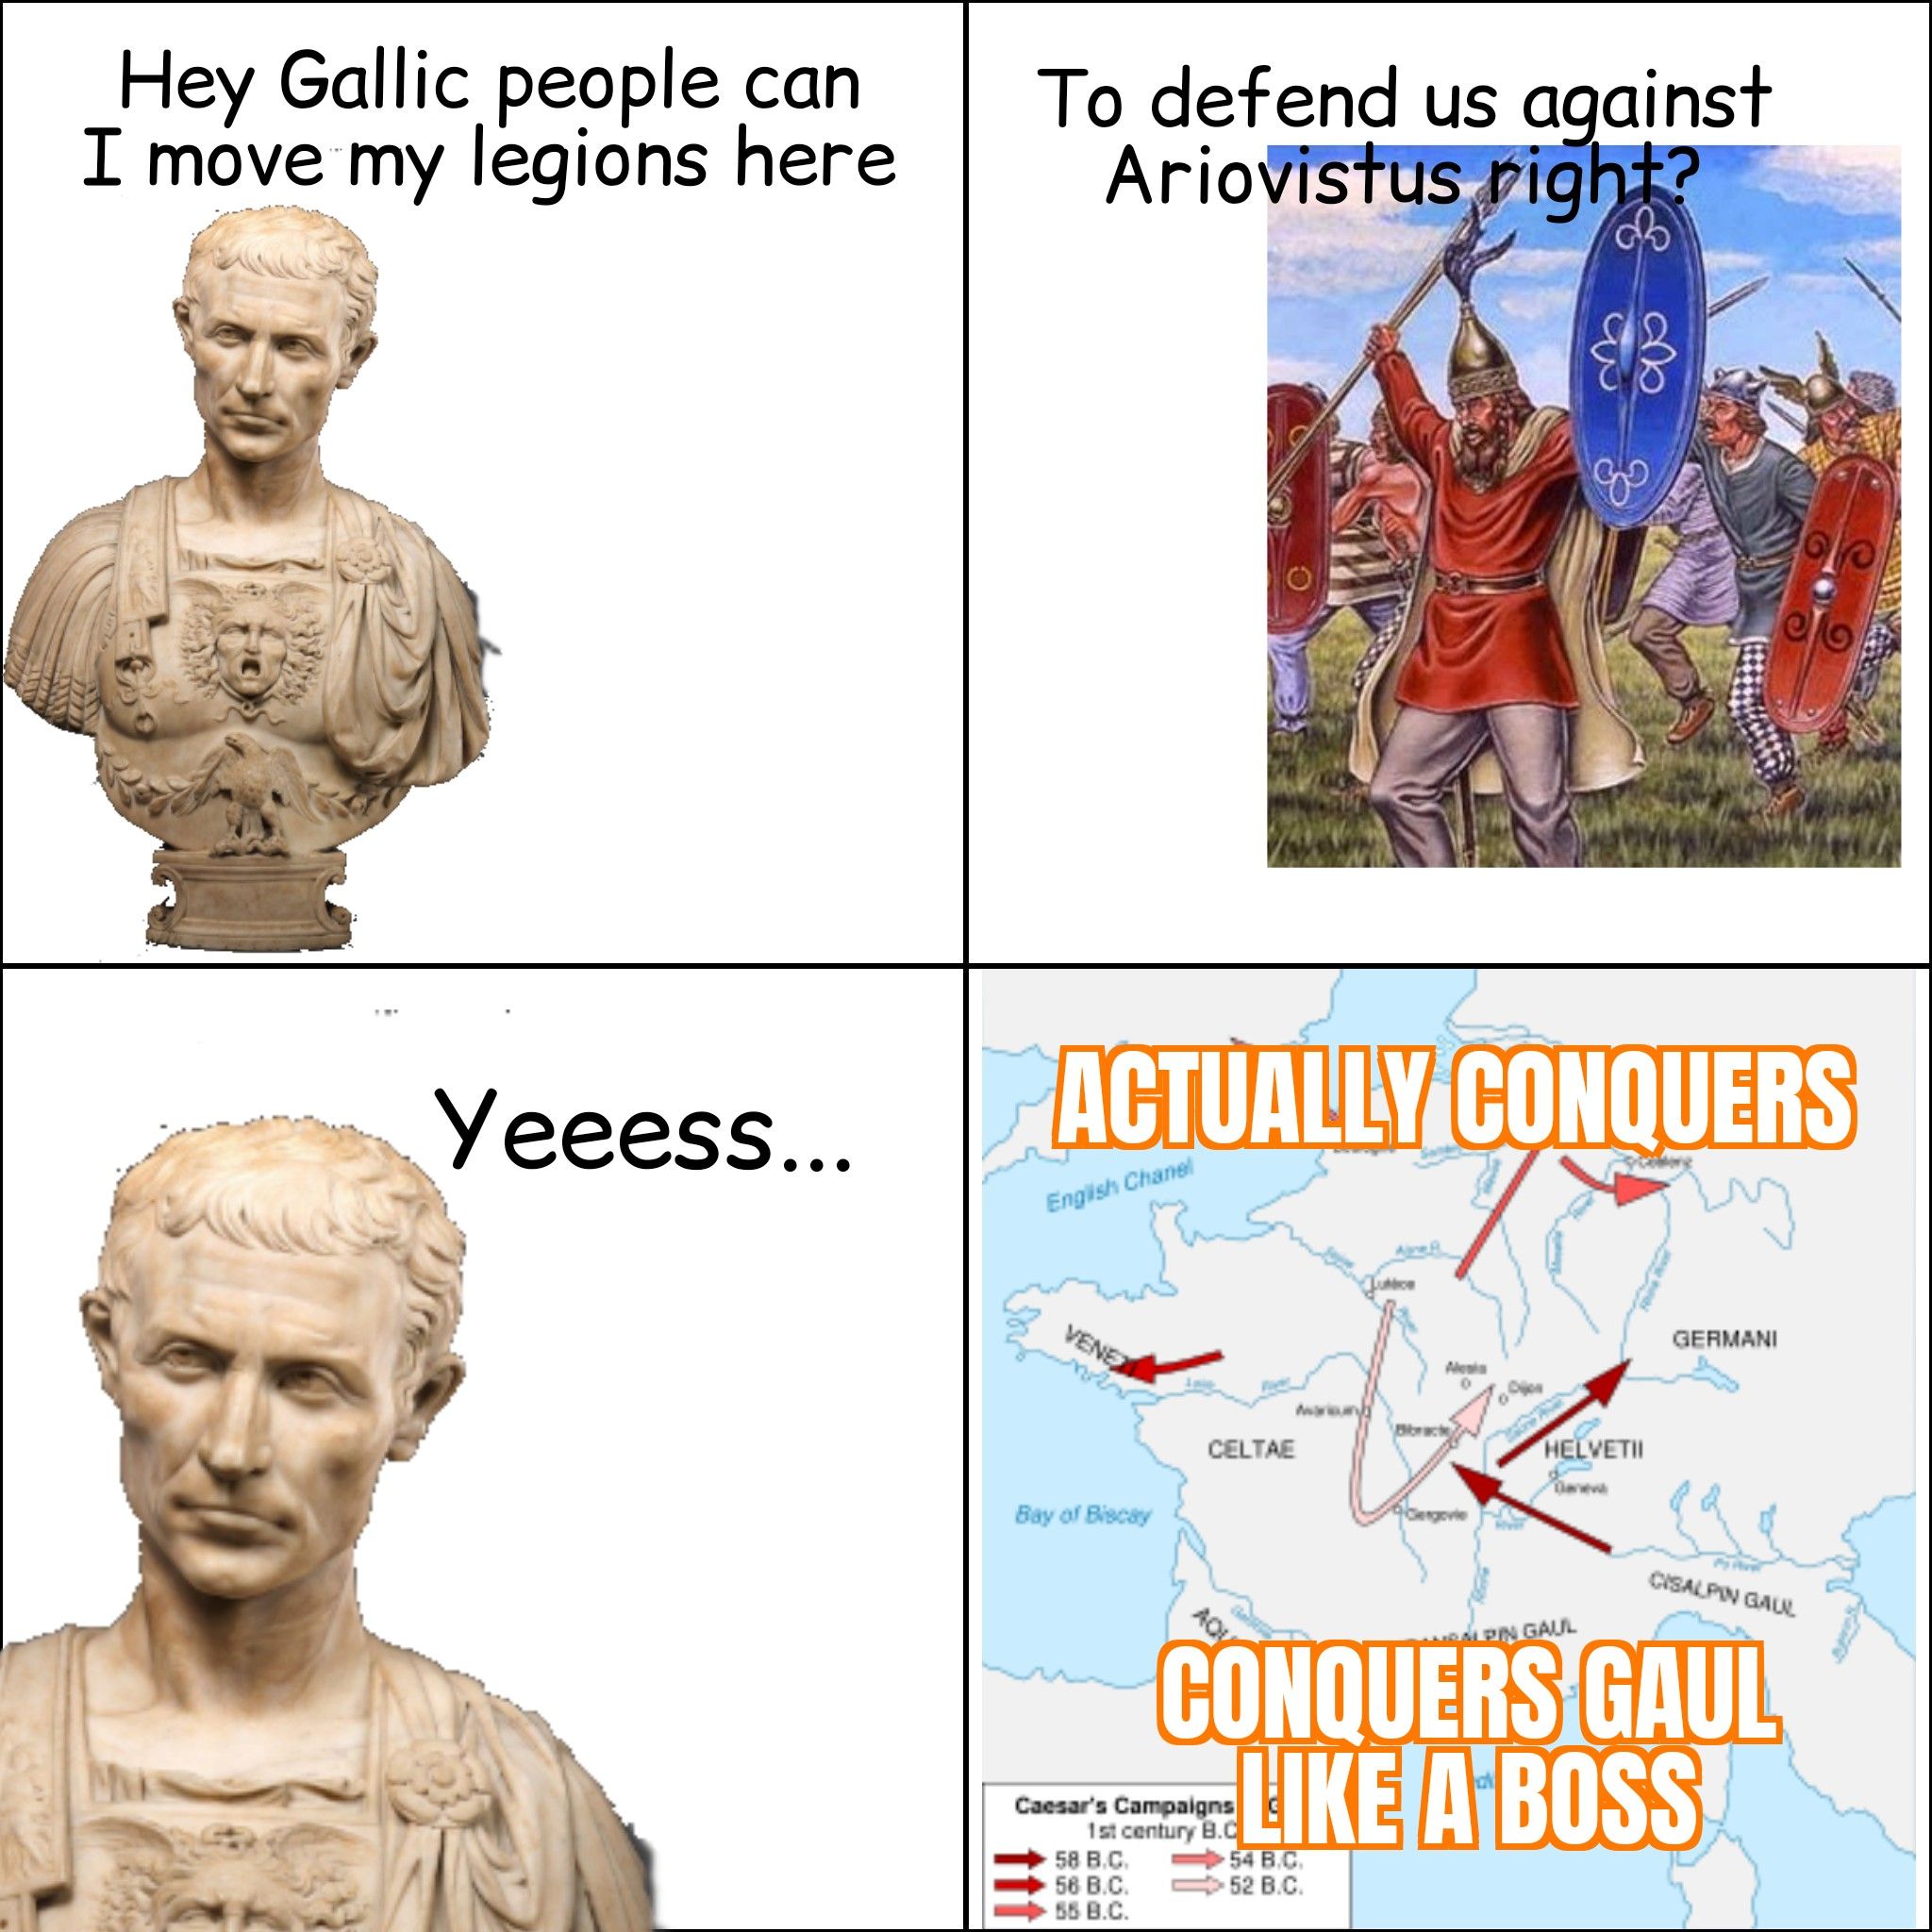 Some good old Roman "protection"